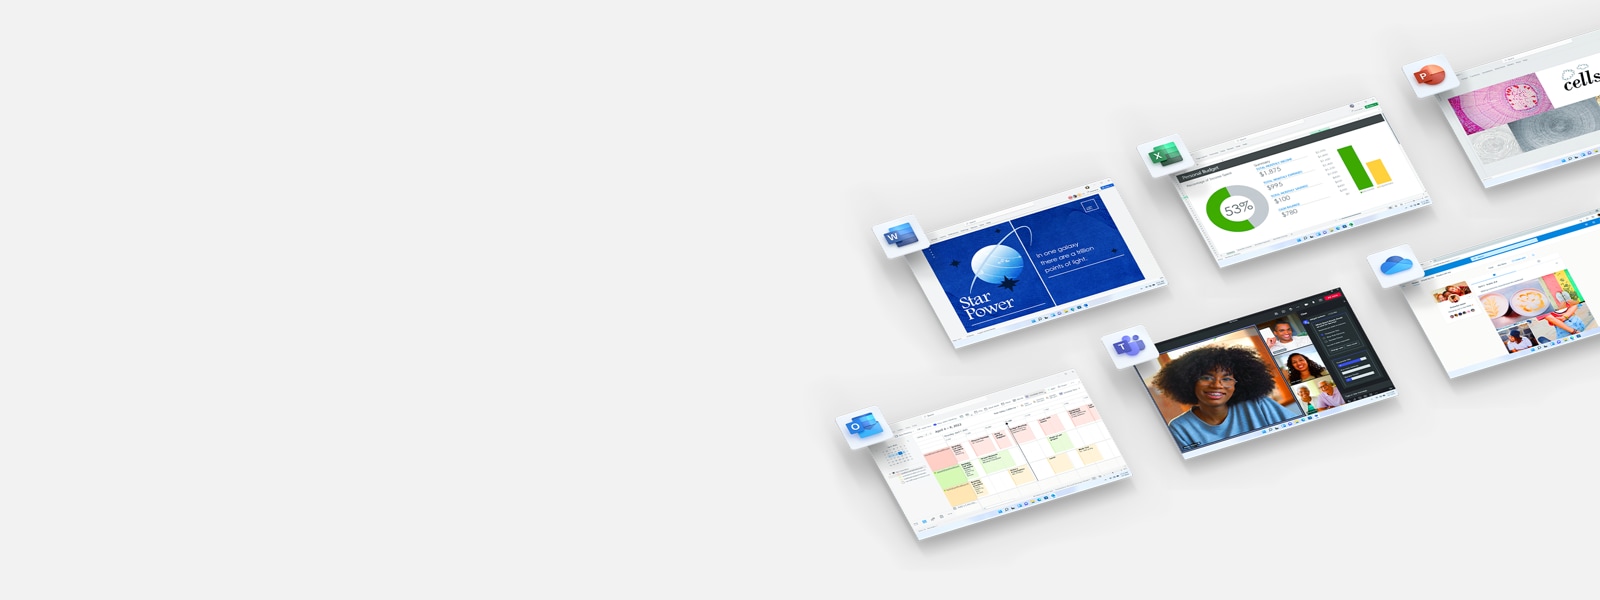 Screens and app icons for Office apps that are part of Microsoft 365